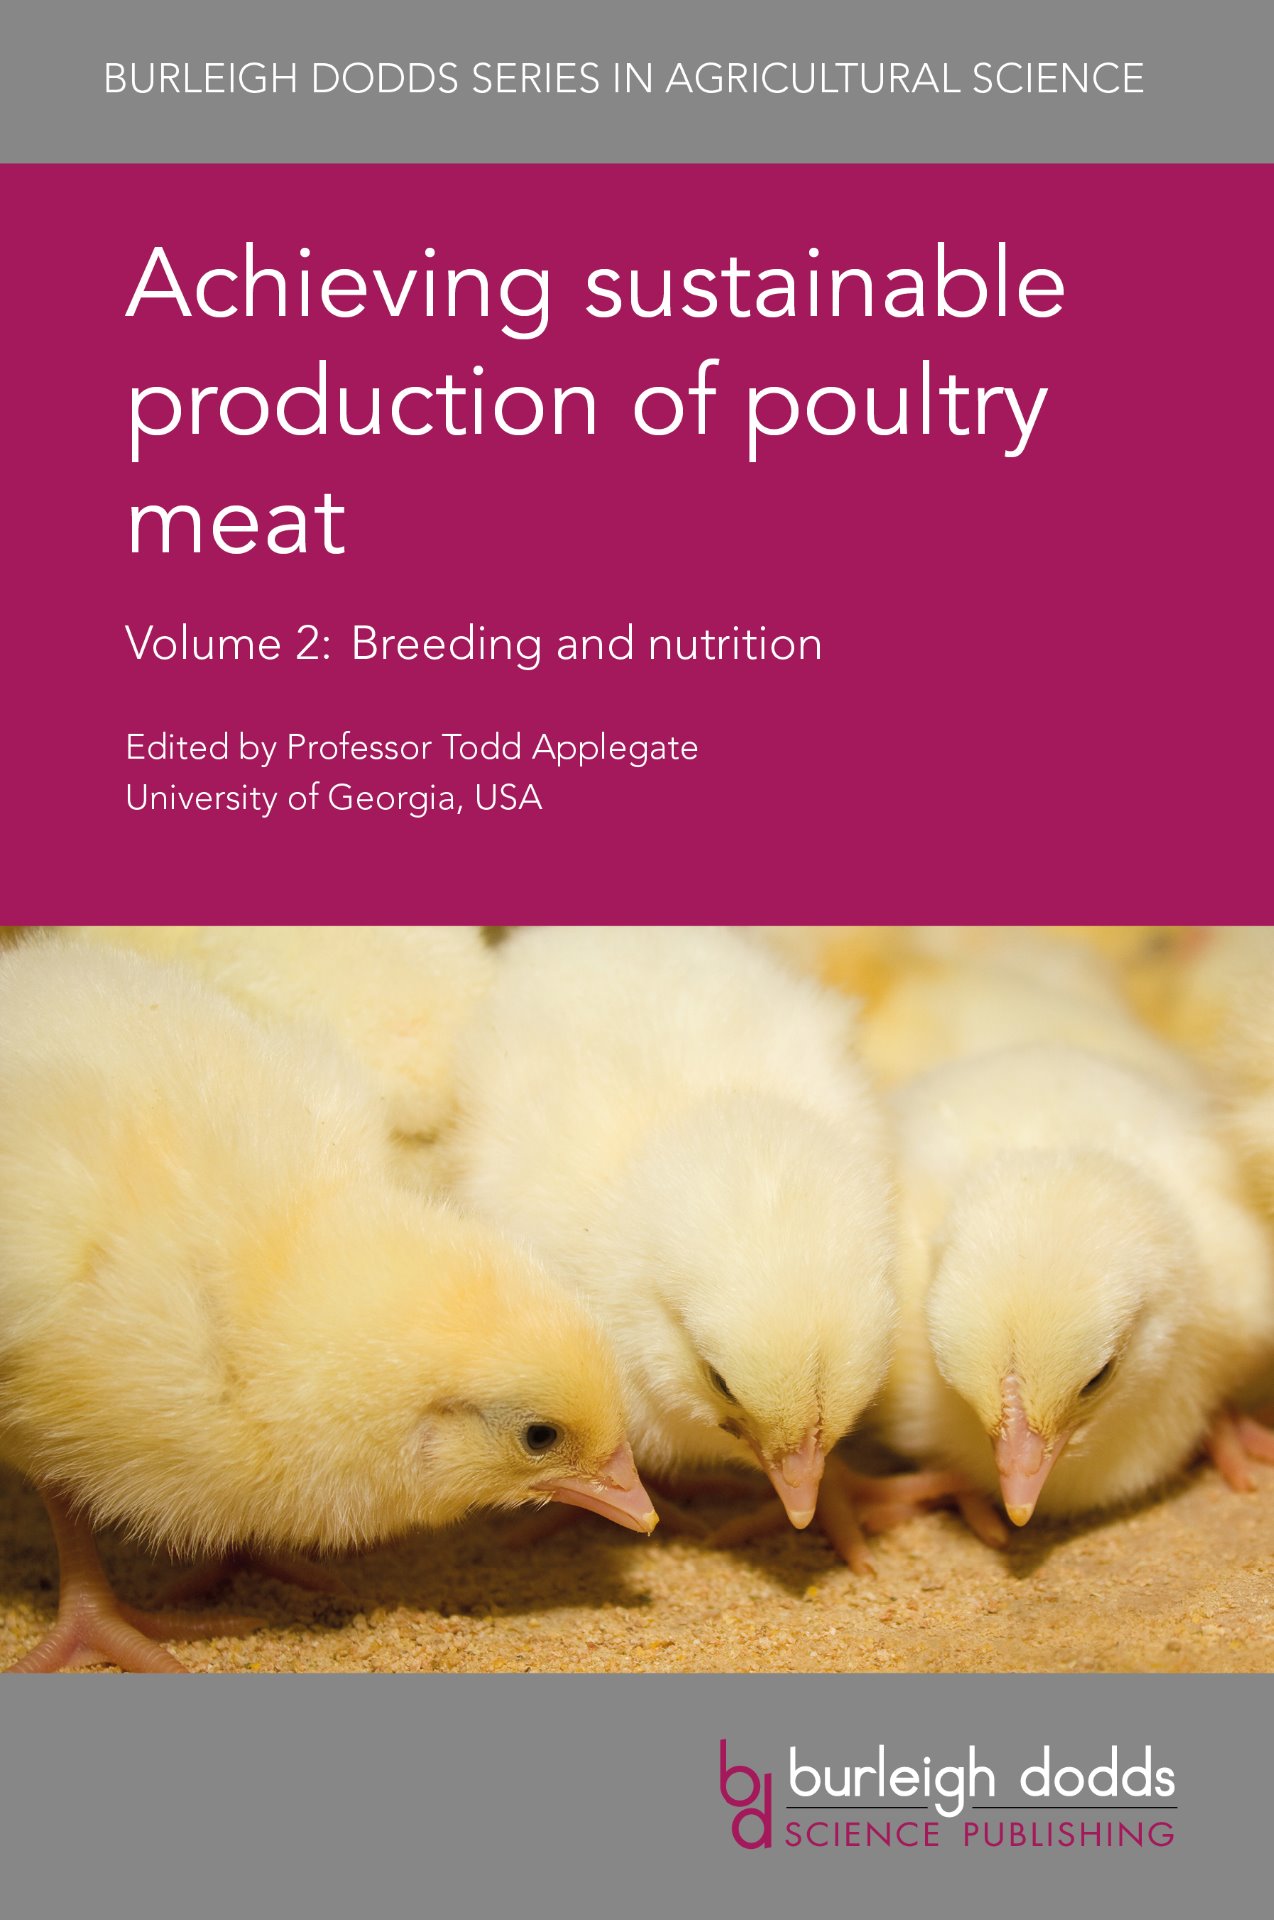 Achieving sustainable production of poultry meat - Volume 2 (Cover image)